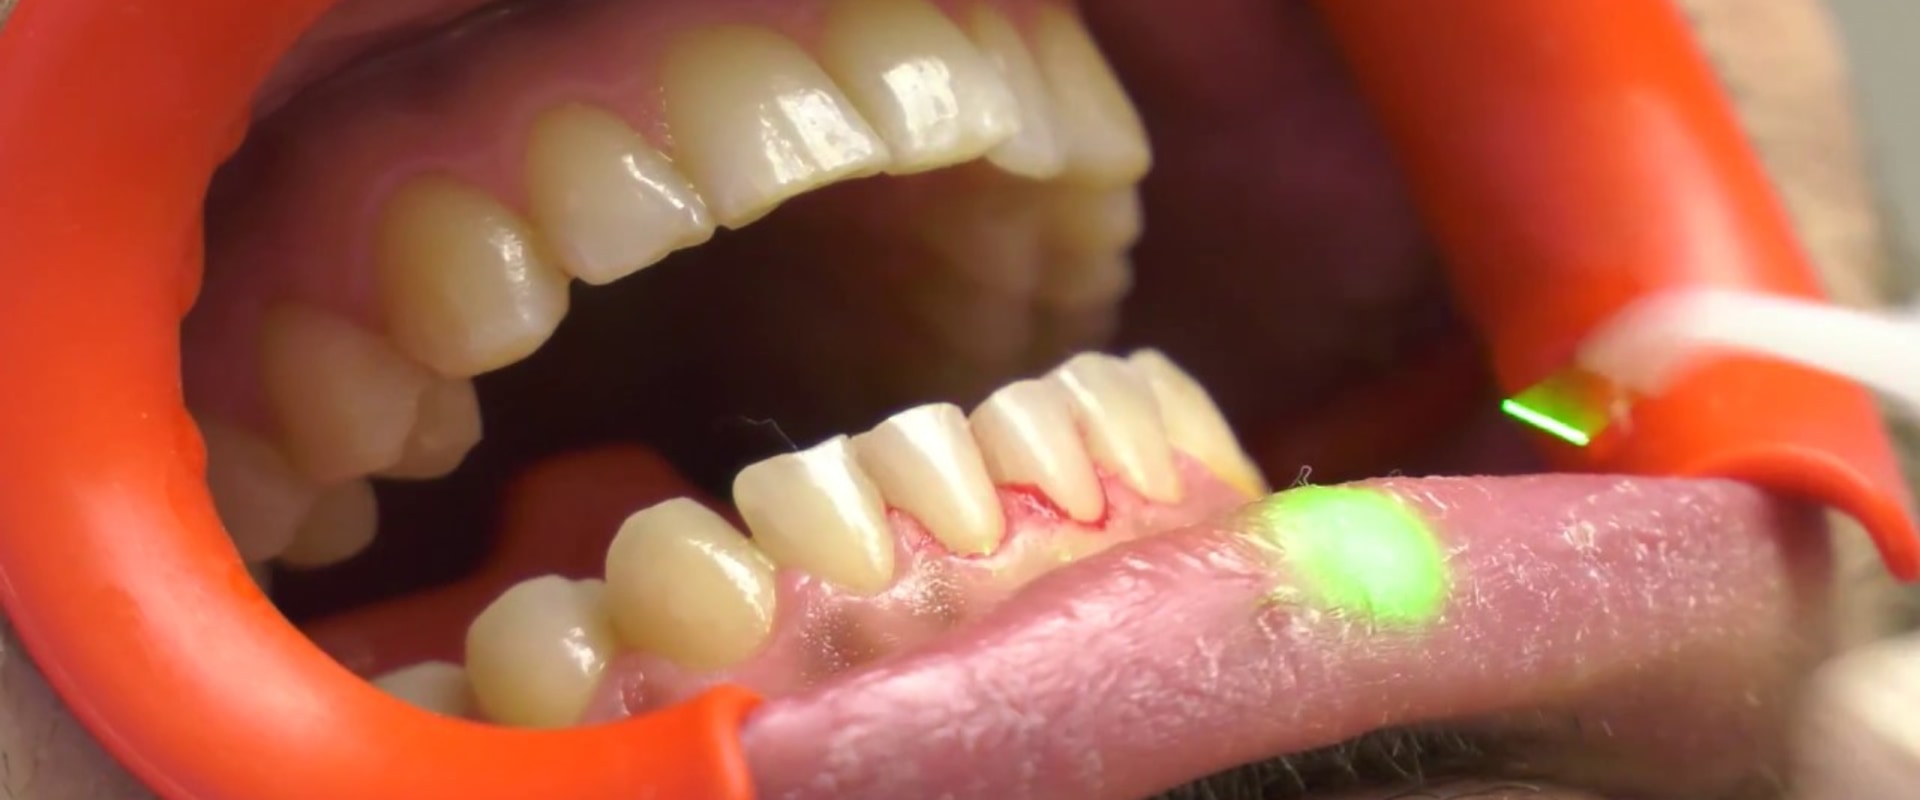 What is laser dental cleaning?